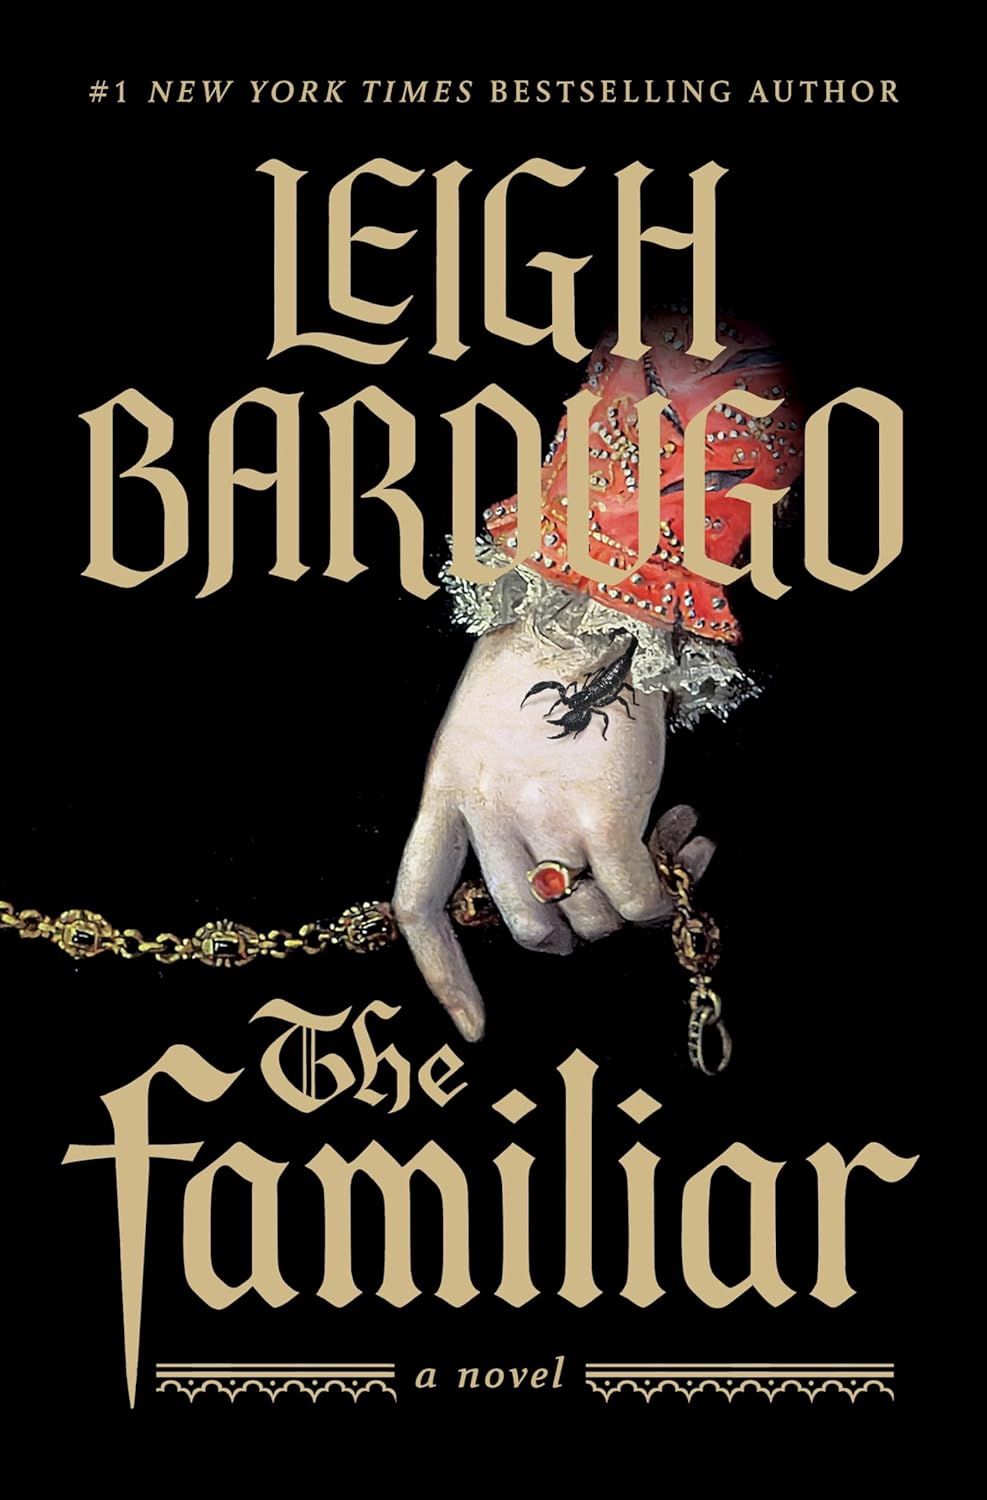 Read-Alikes for ‘The Familiar’ by Leigh Bardugo | LibraryReads